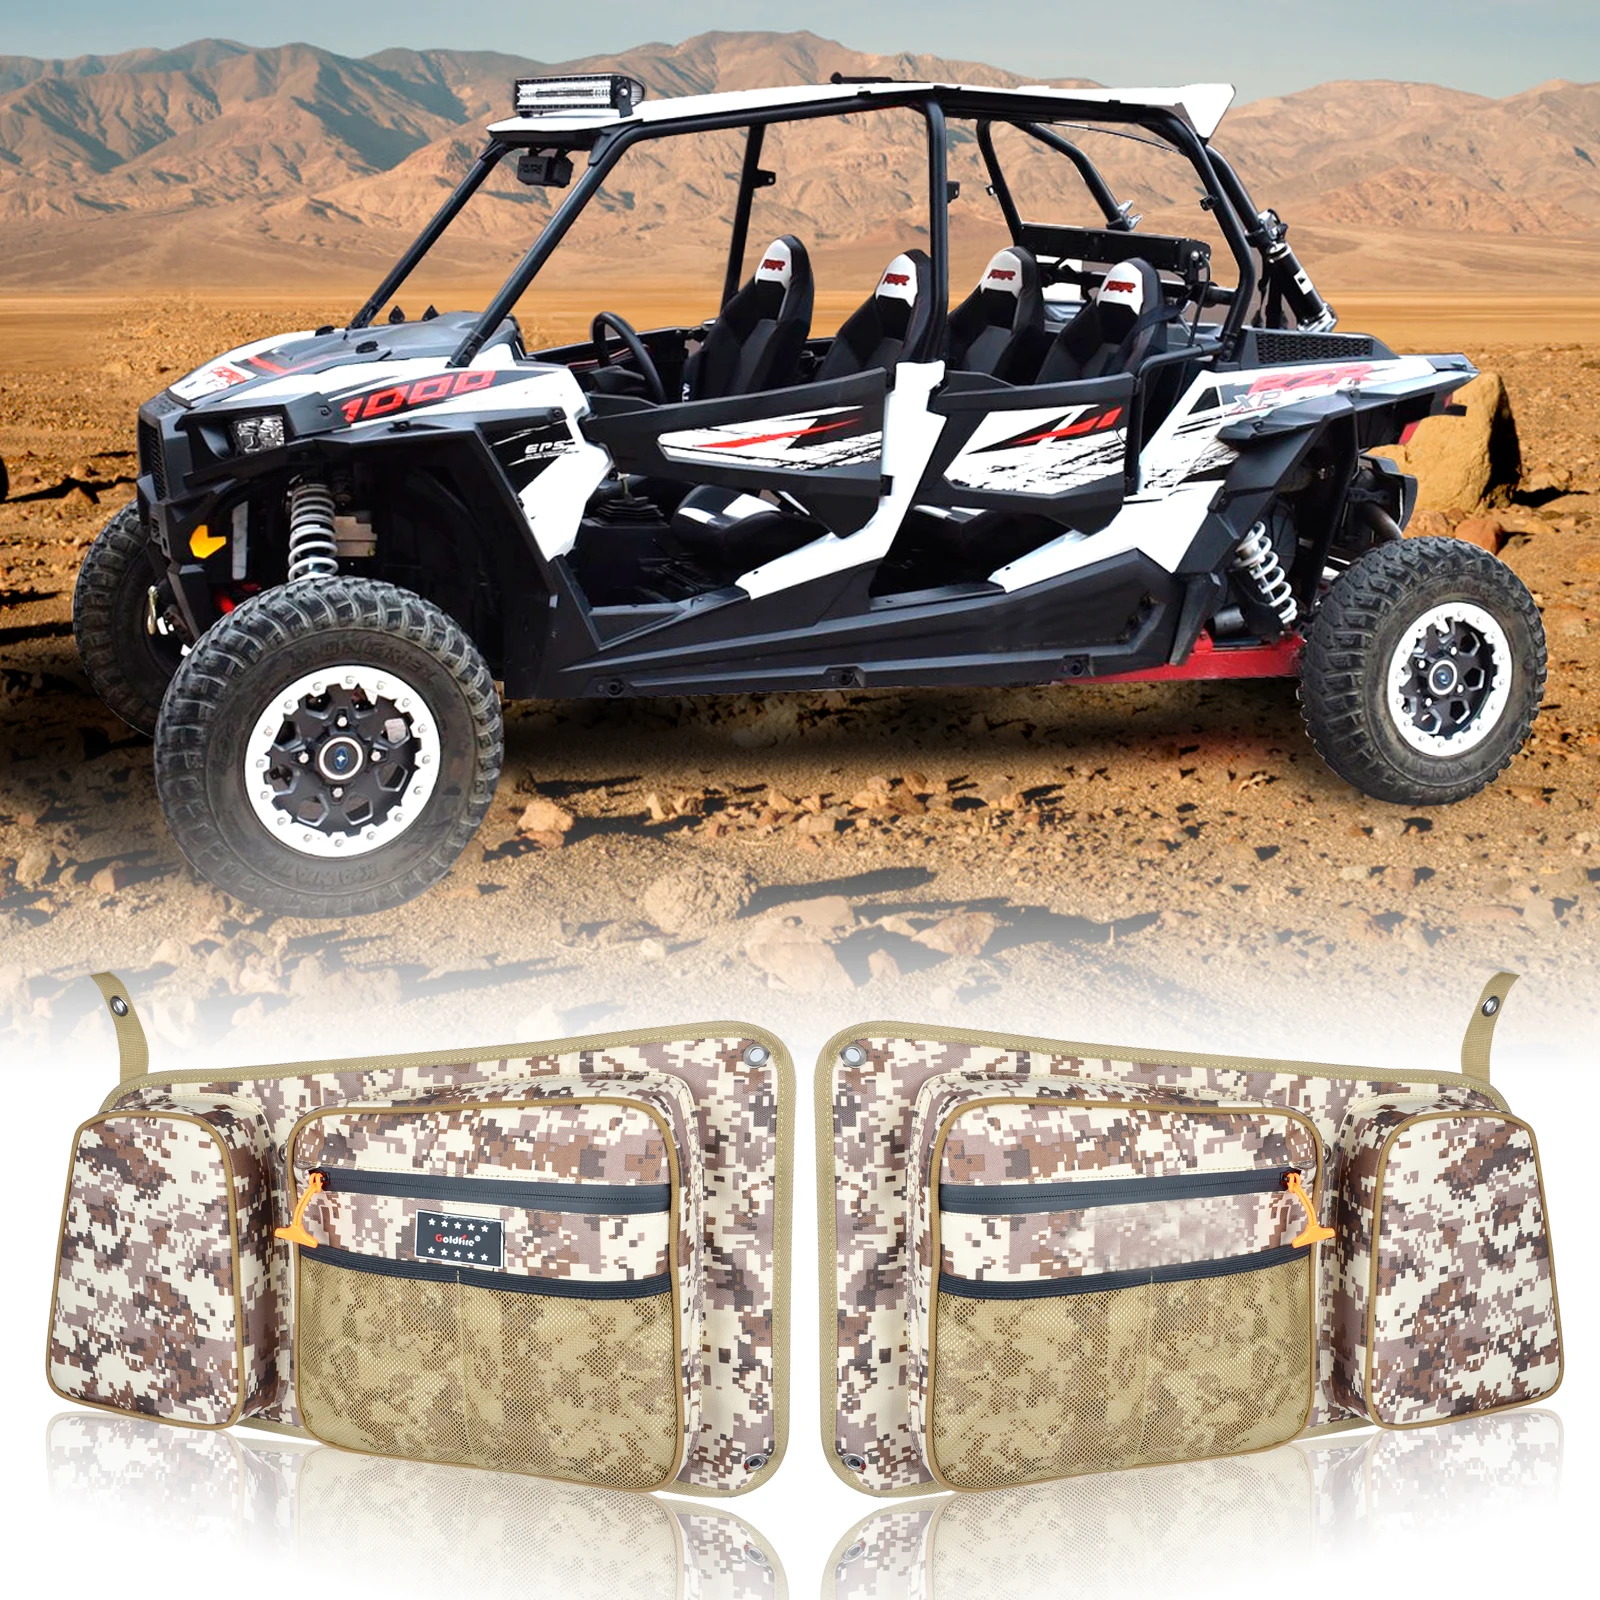 RZR Rear Door Bags Passenger and Driver Side Storage Bag Set with Knee Pad For Polaris RZR 4 900 XP4 1000 4 Door Turbo 2014-2020